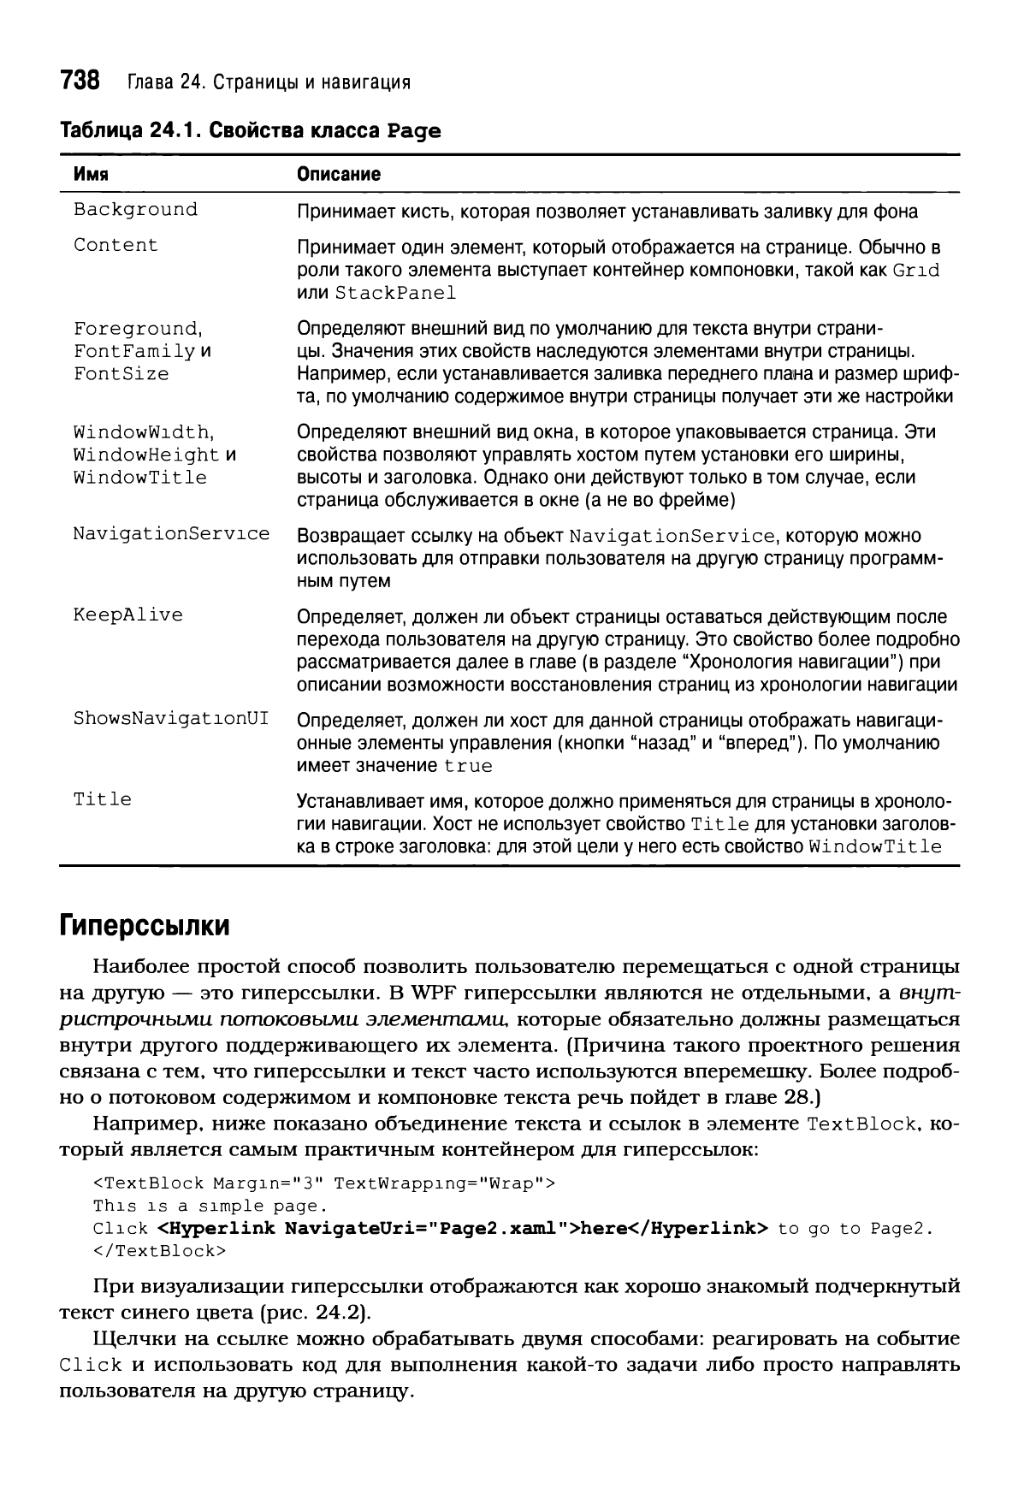 Класс Page